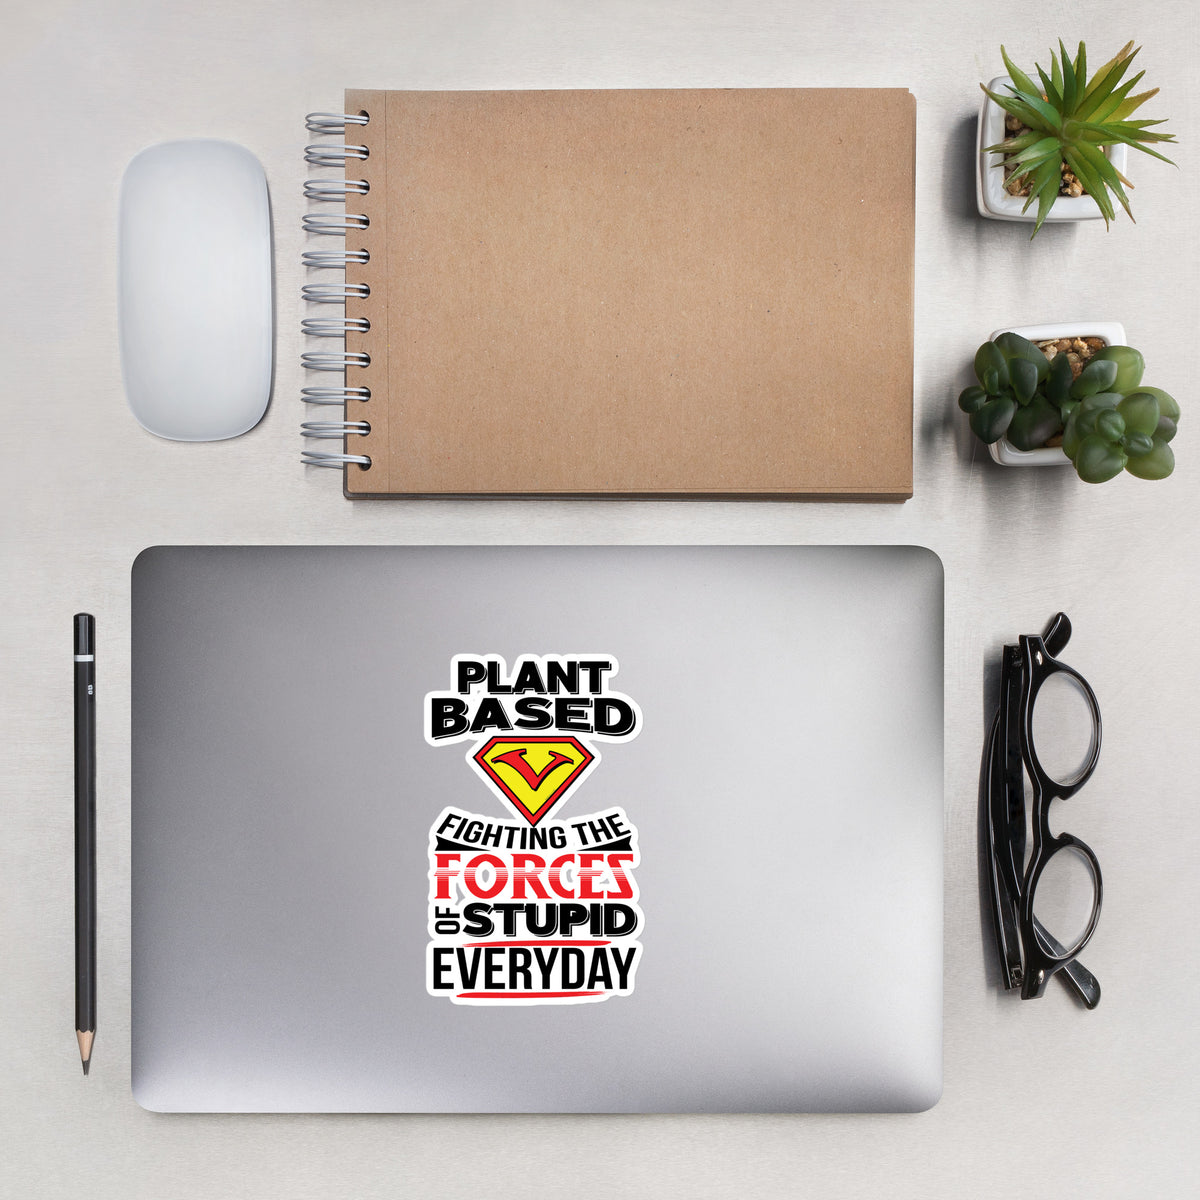 PLANT BASED: FIGHTING THE FORCES OF STUPID Sticker